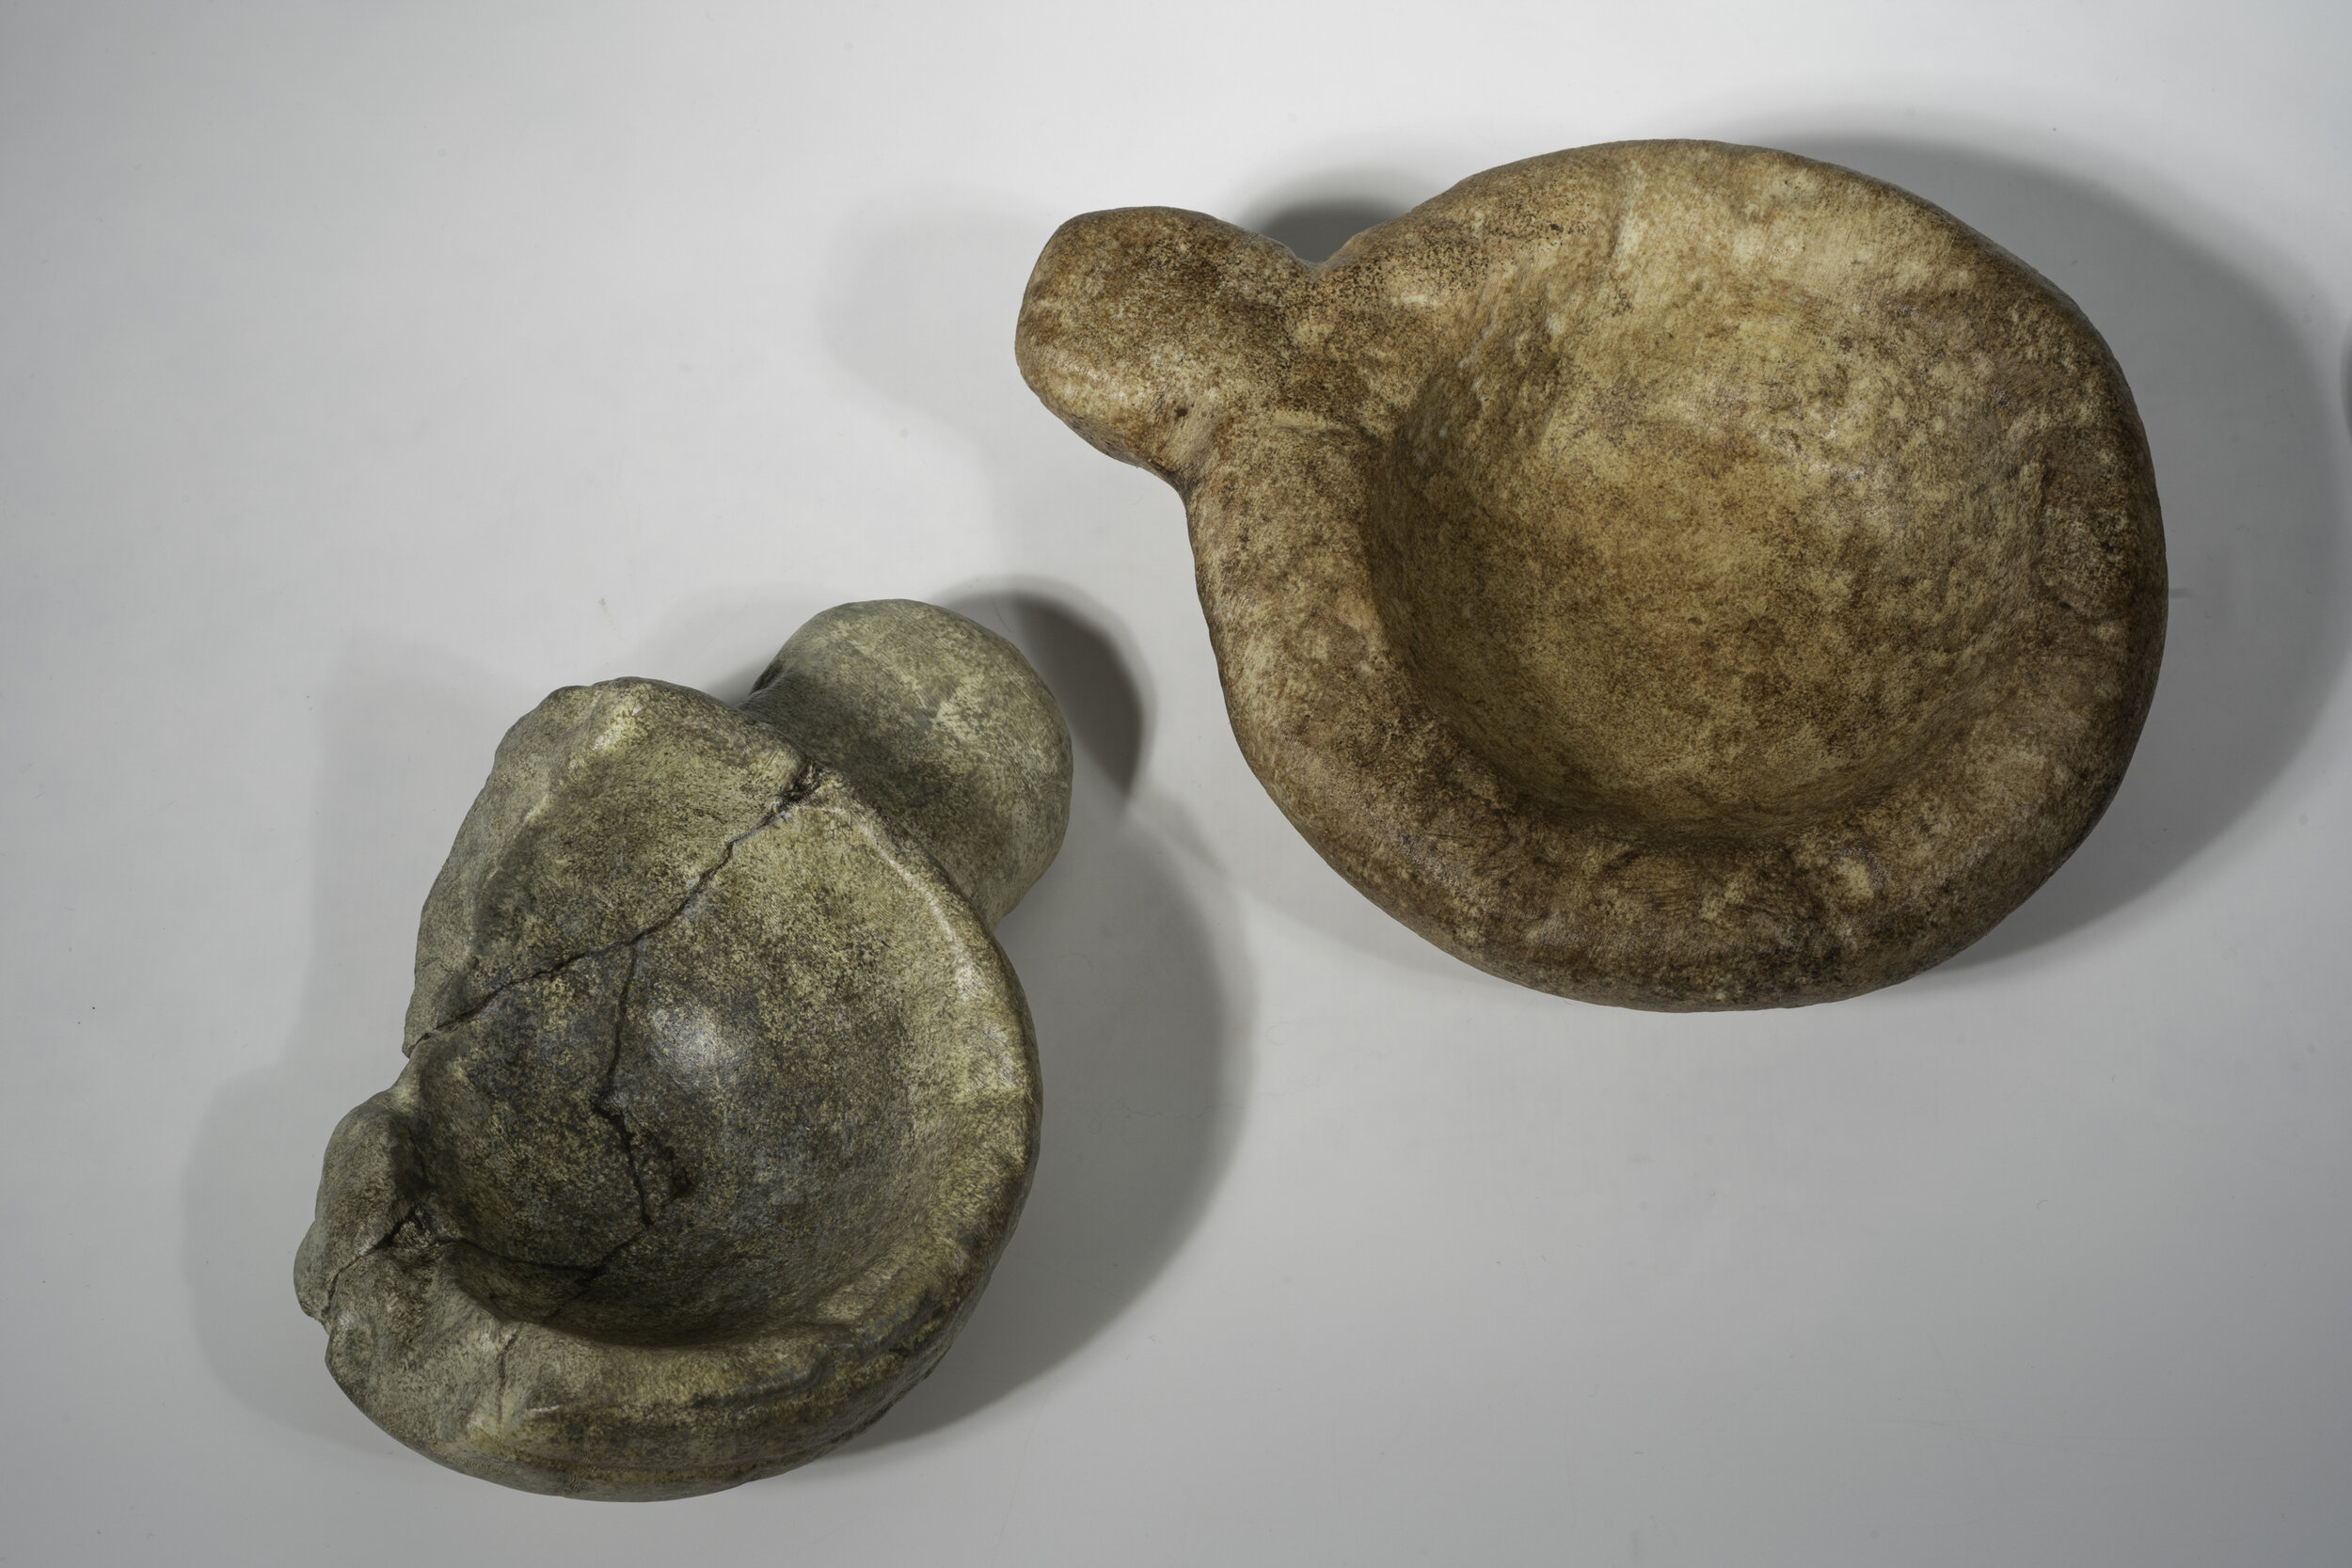   Finished 3D prints of stone lamps | Image: AOC Archaeology  